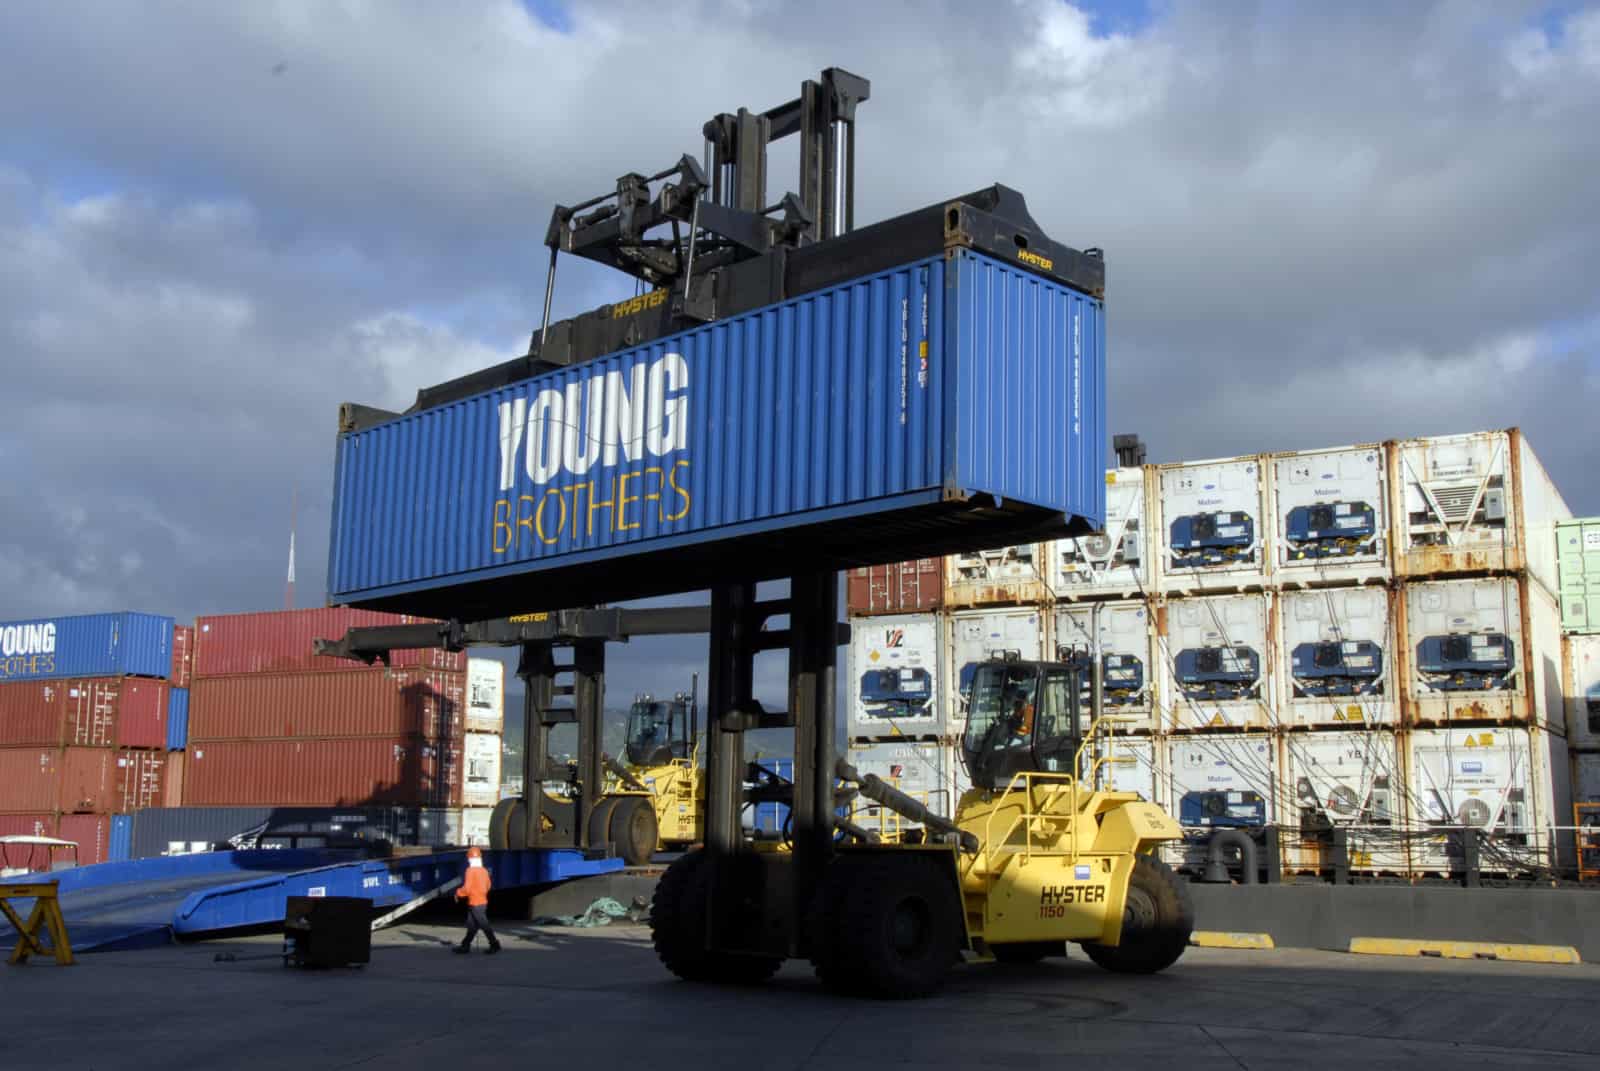 A container forklift holds a Young Brothers container high in a shipping yard.